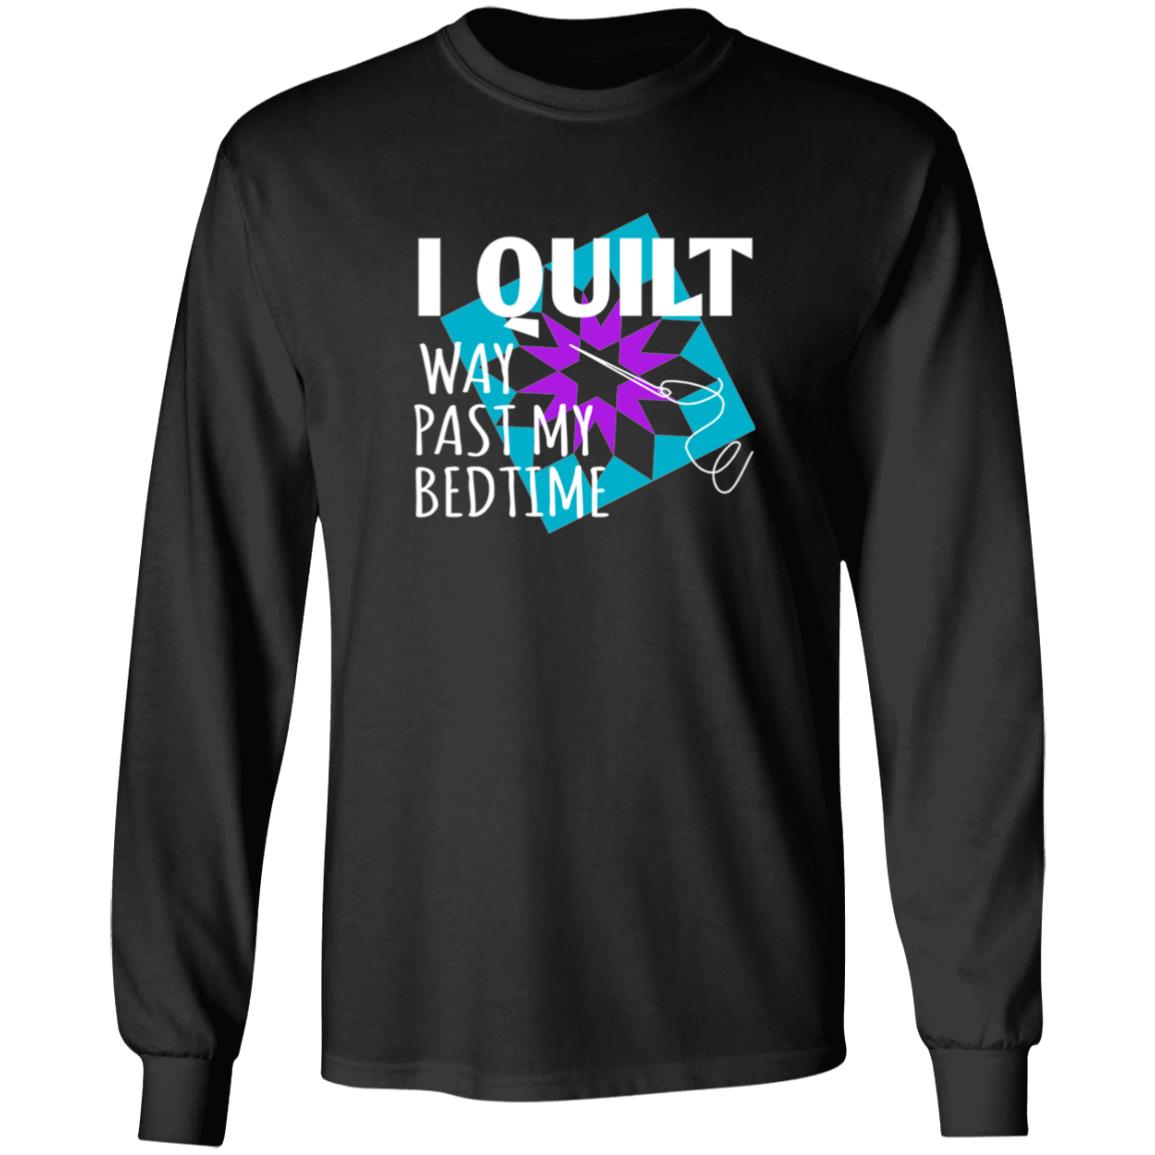 I Quilt Way Past My Bedtime Long Sleeve T-Shirt